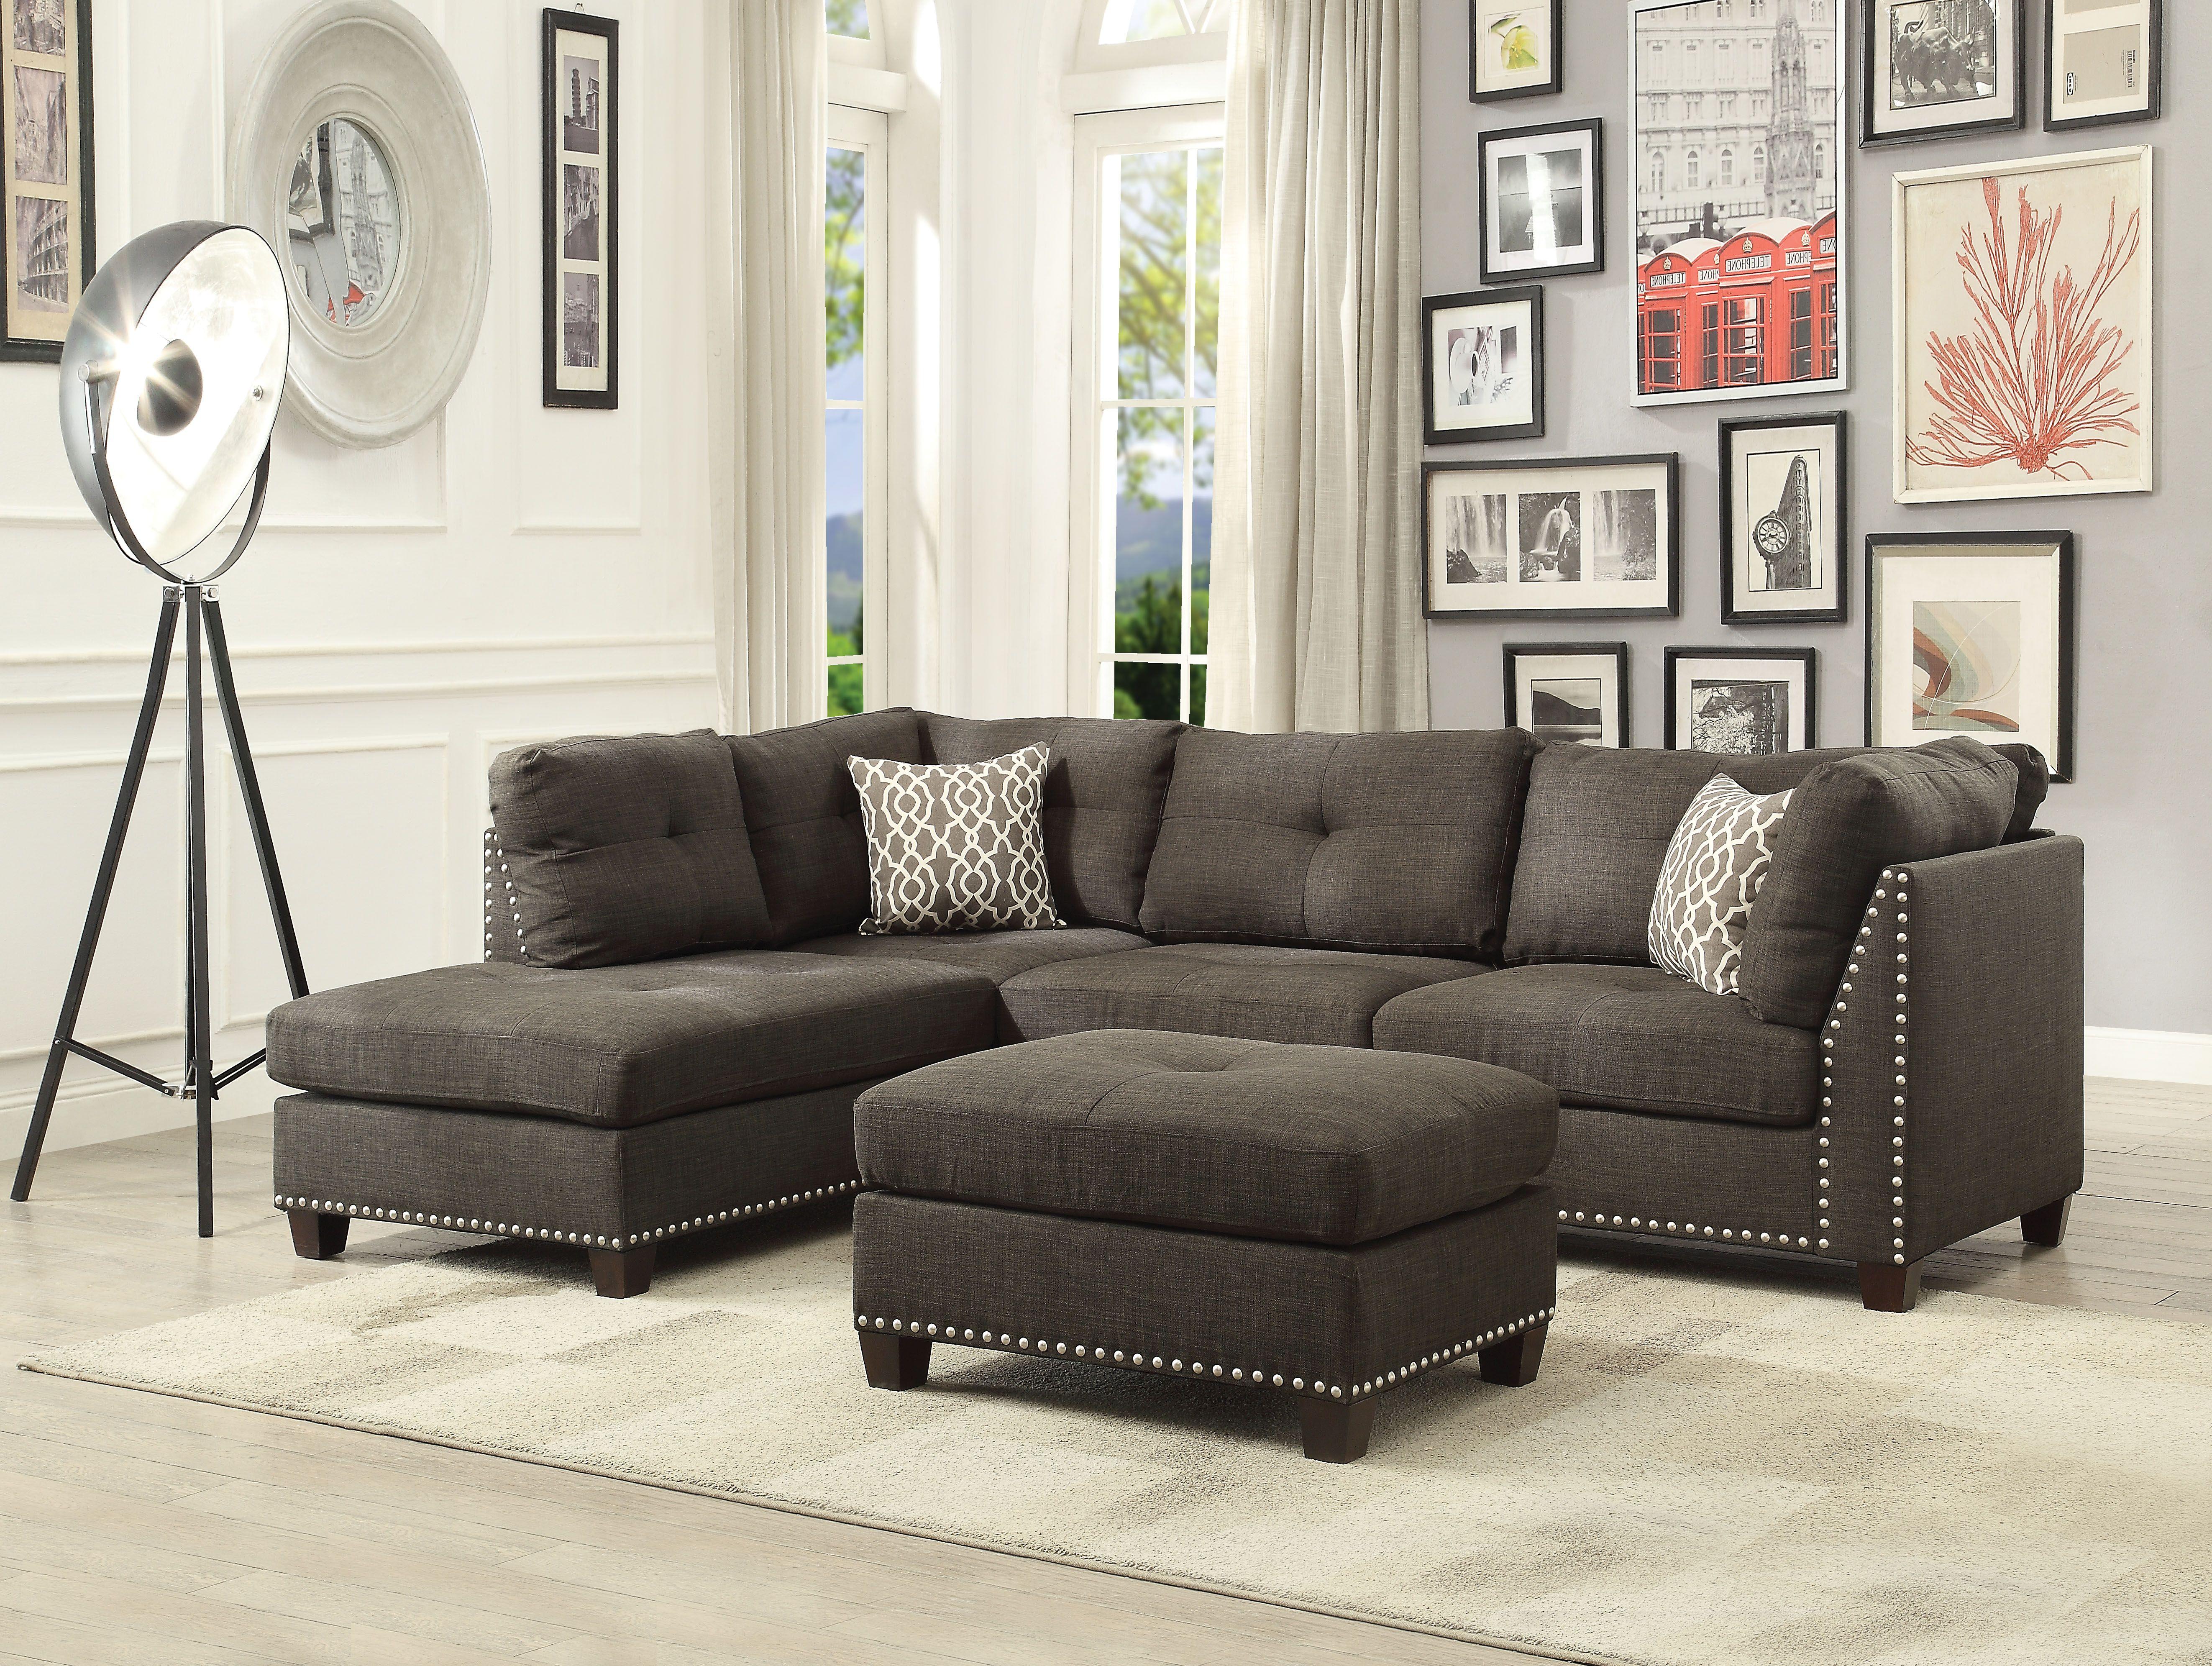 Contemporary, Classic, Simple Sectional Sofa and Ottoman Laurissa 54375-3pcs in Charcoal Linen